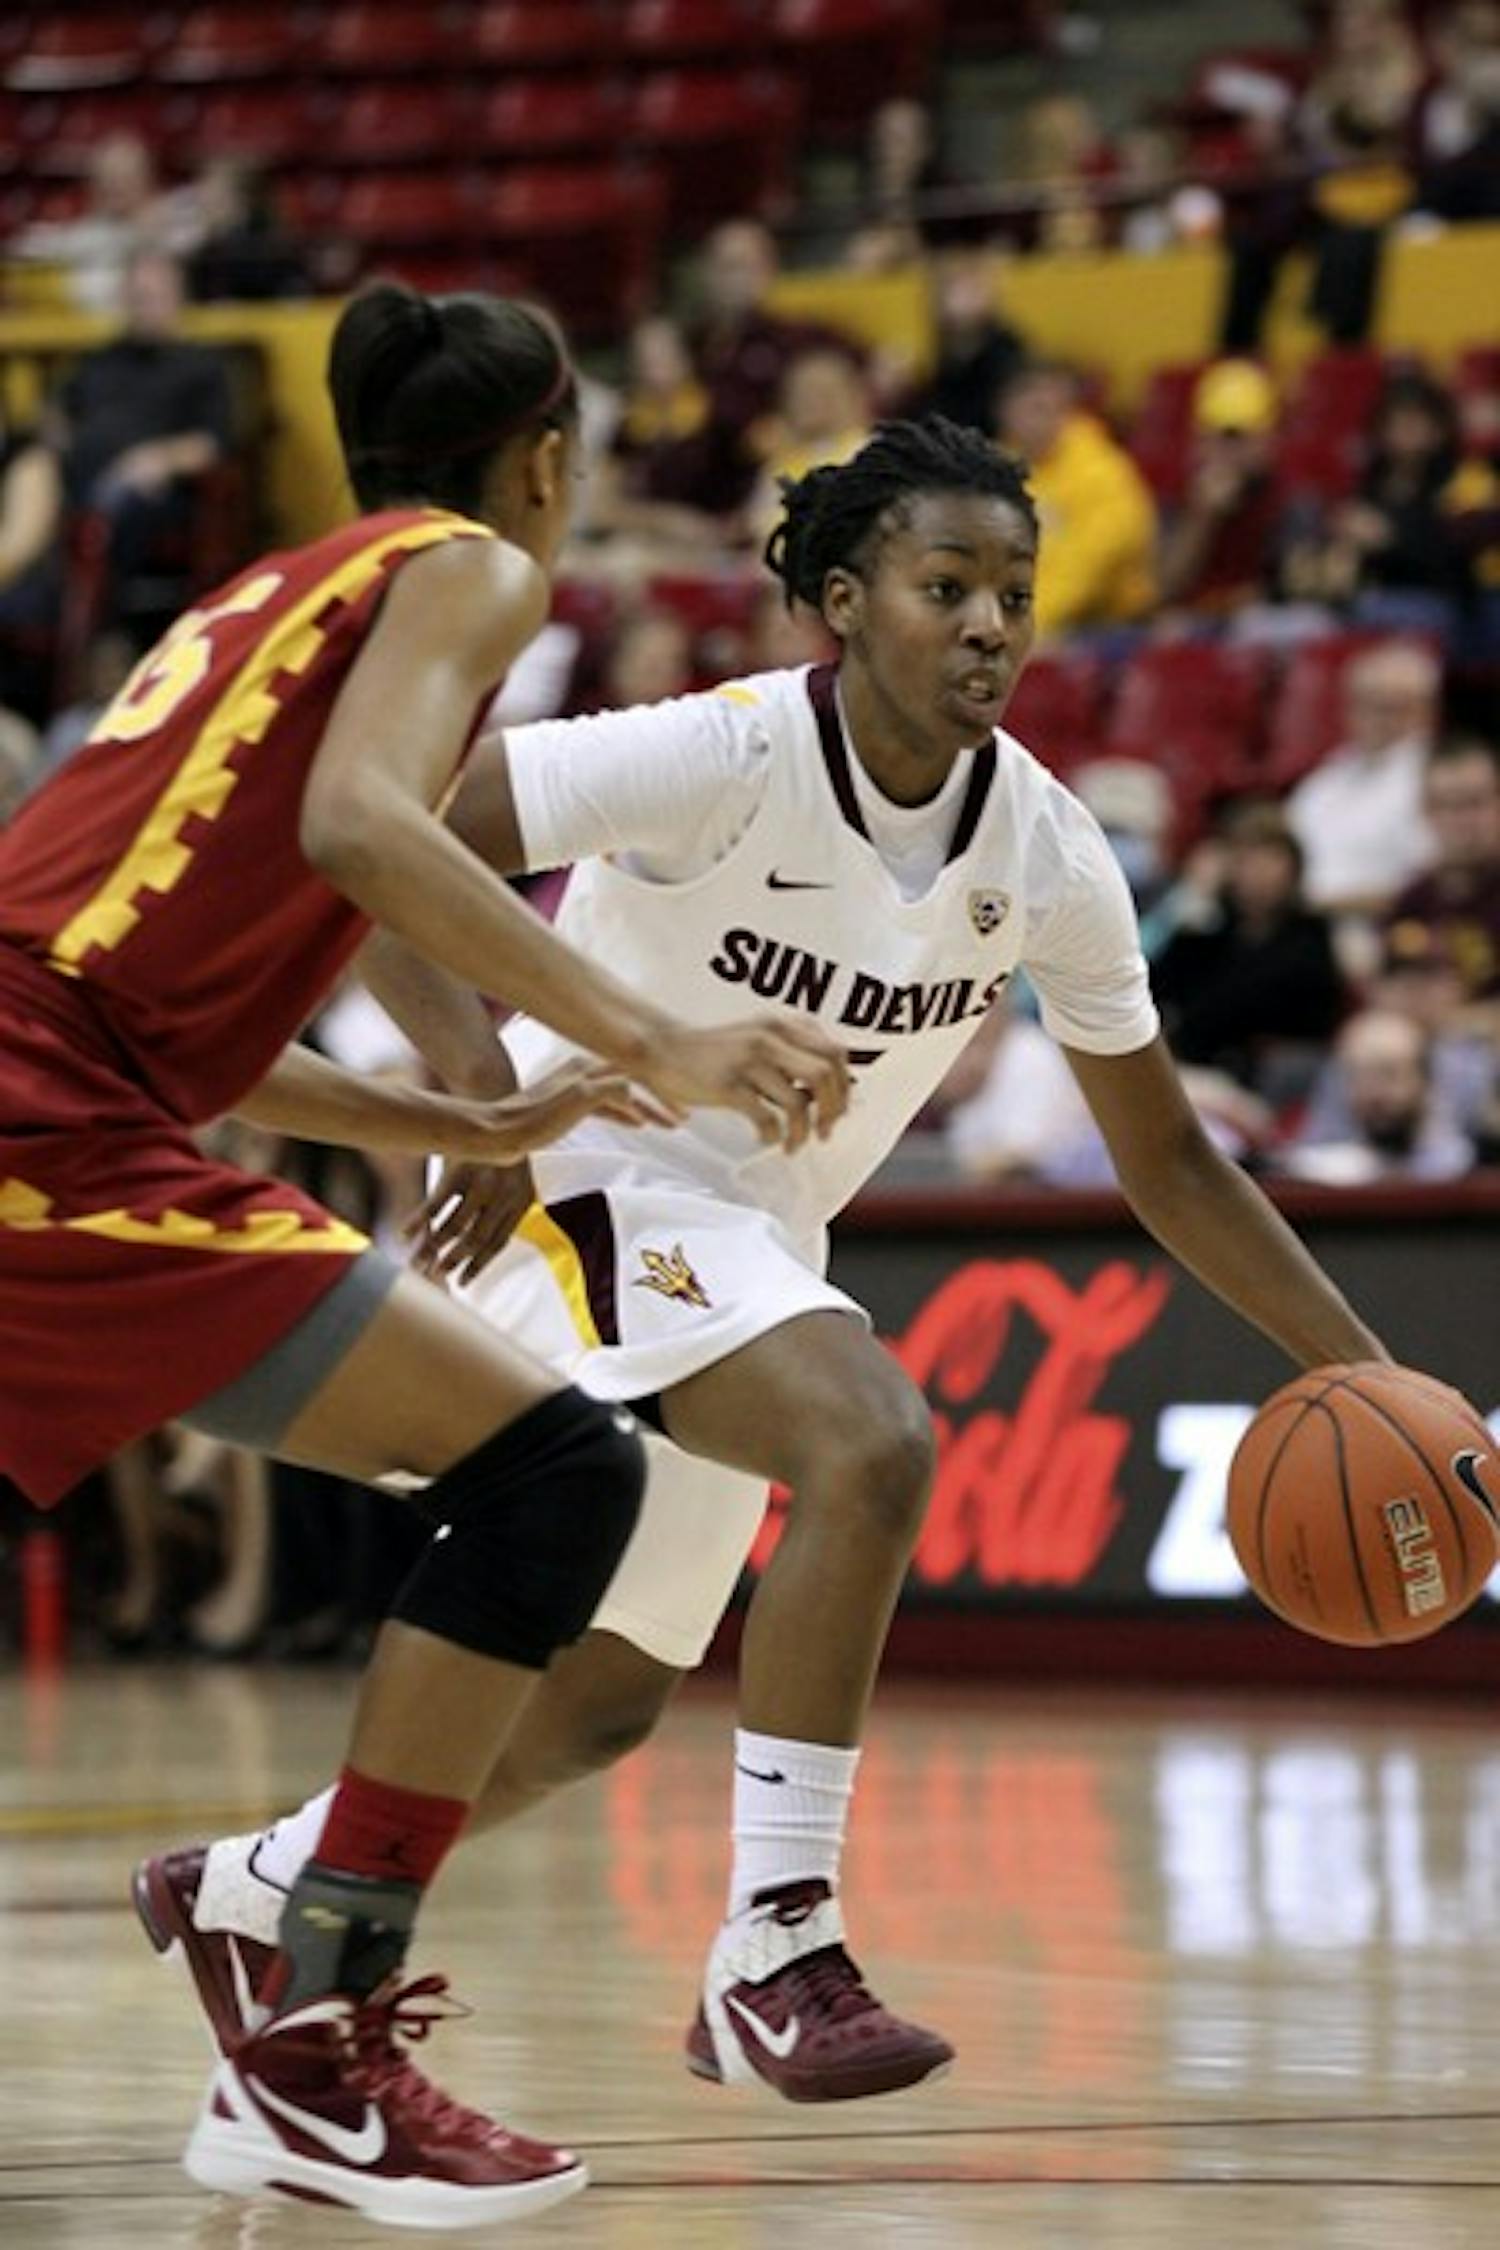 Deja Mann dribbles up the court in a game against USC on Jan. 5. Mann and the Sun Devils hope to maintain their momentum as they return home. (Photo by Sam Rosenbaum)